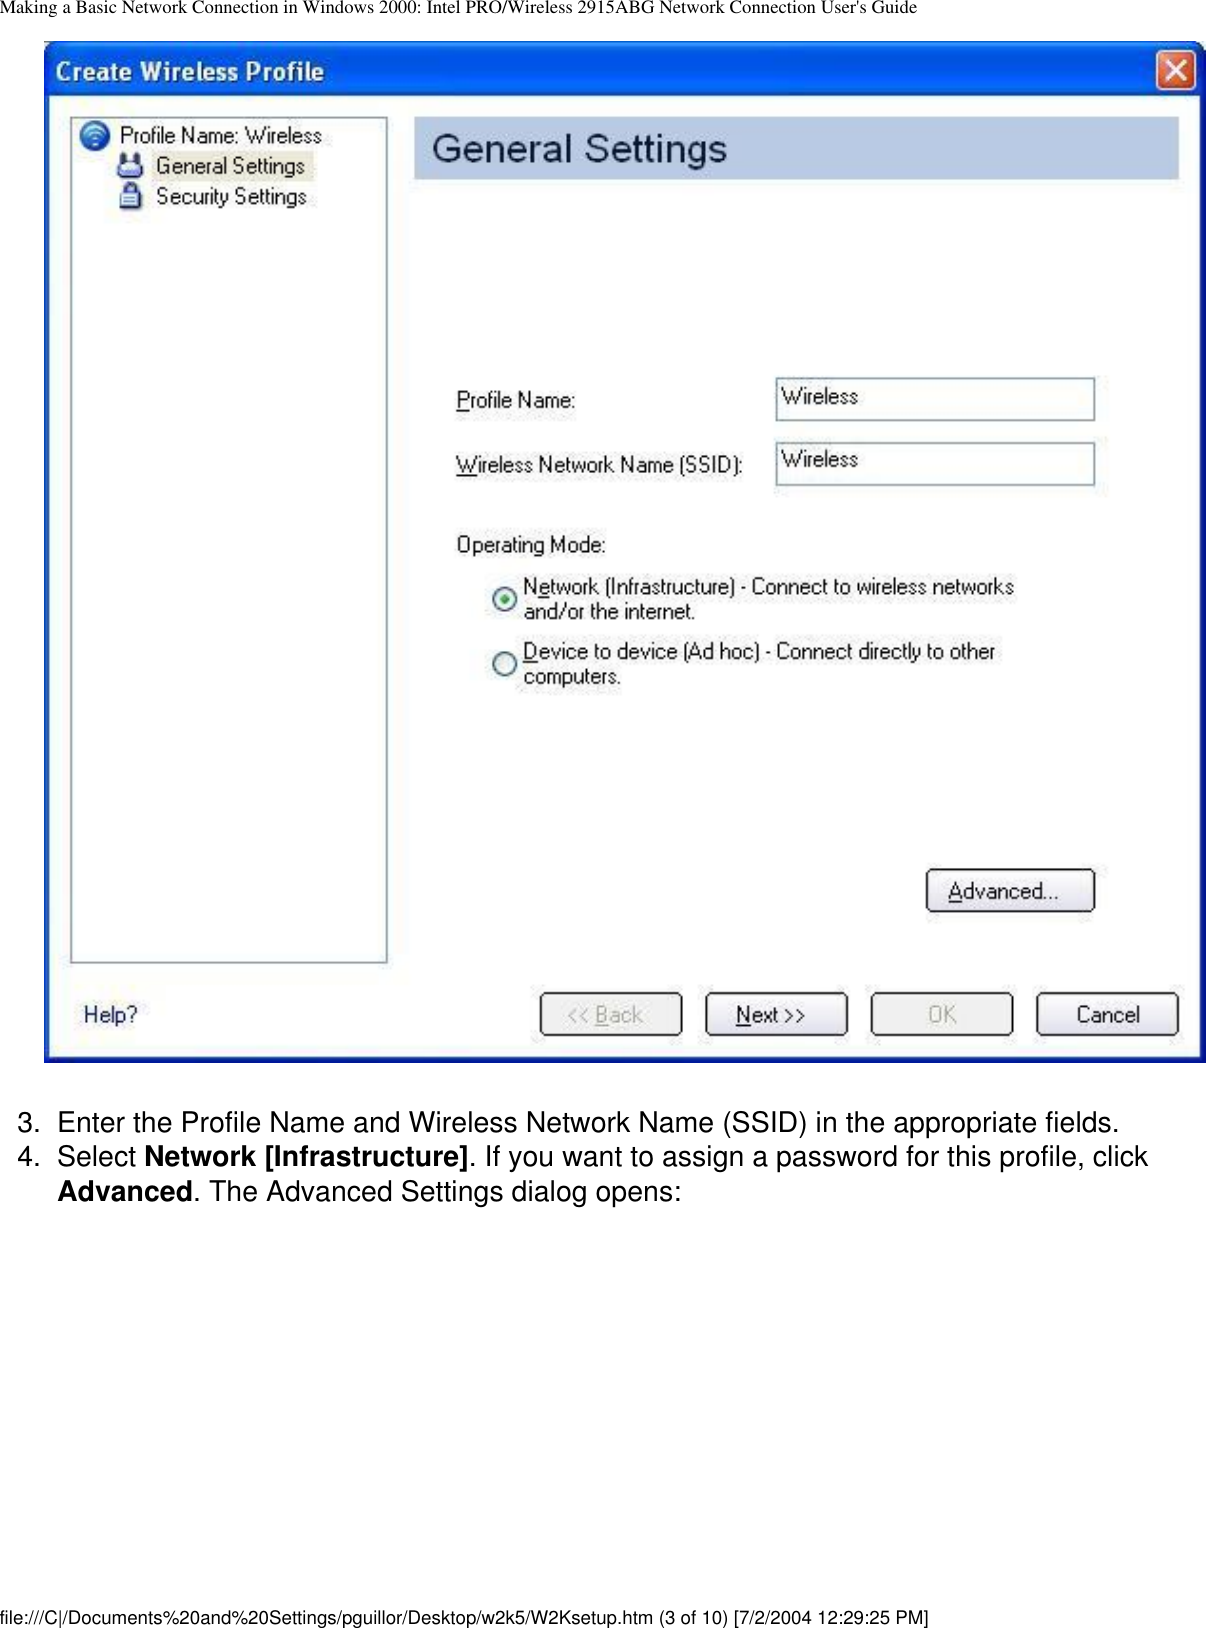 Making a Basic Network Connection in Windows 2000: Intel PRO/Wireless 2915ABG Network Connection User&apos;s Guide        3.  Enter the Profile Name and Wireless Network Name (SSID) in the appropriate fields.4.  Select Network [Infrastructure]. If you want to assign a password for this profile, click Advanced. The Advanced Settings dialog opens:file:///C|/Documents%20and%20Settings/pguillor/Desktop/w2k5/W2Ksetup.htm (3 of 10) [7/2/2004 12:29:25 PM]